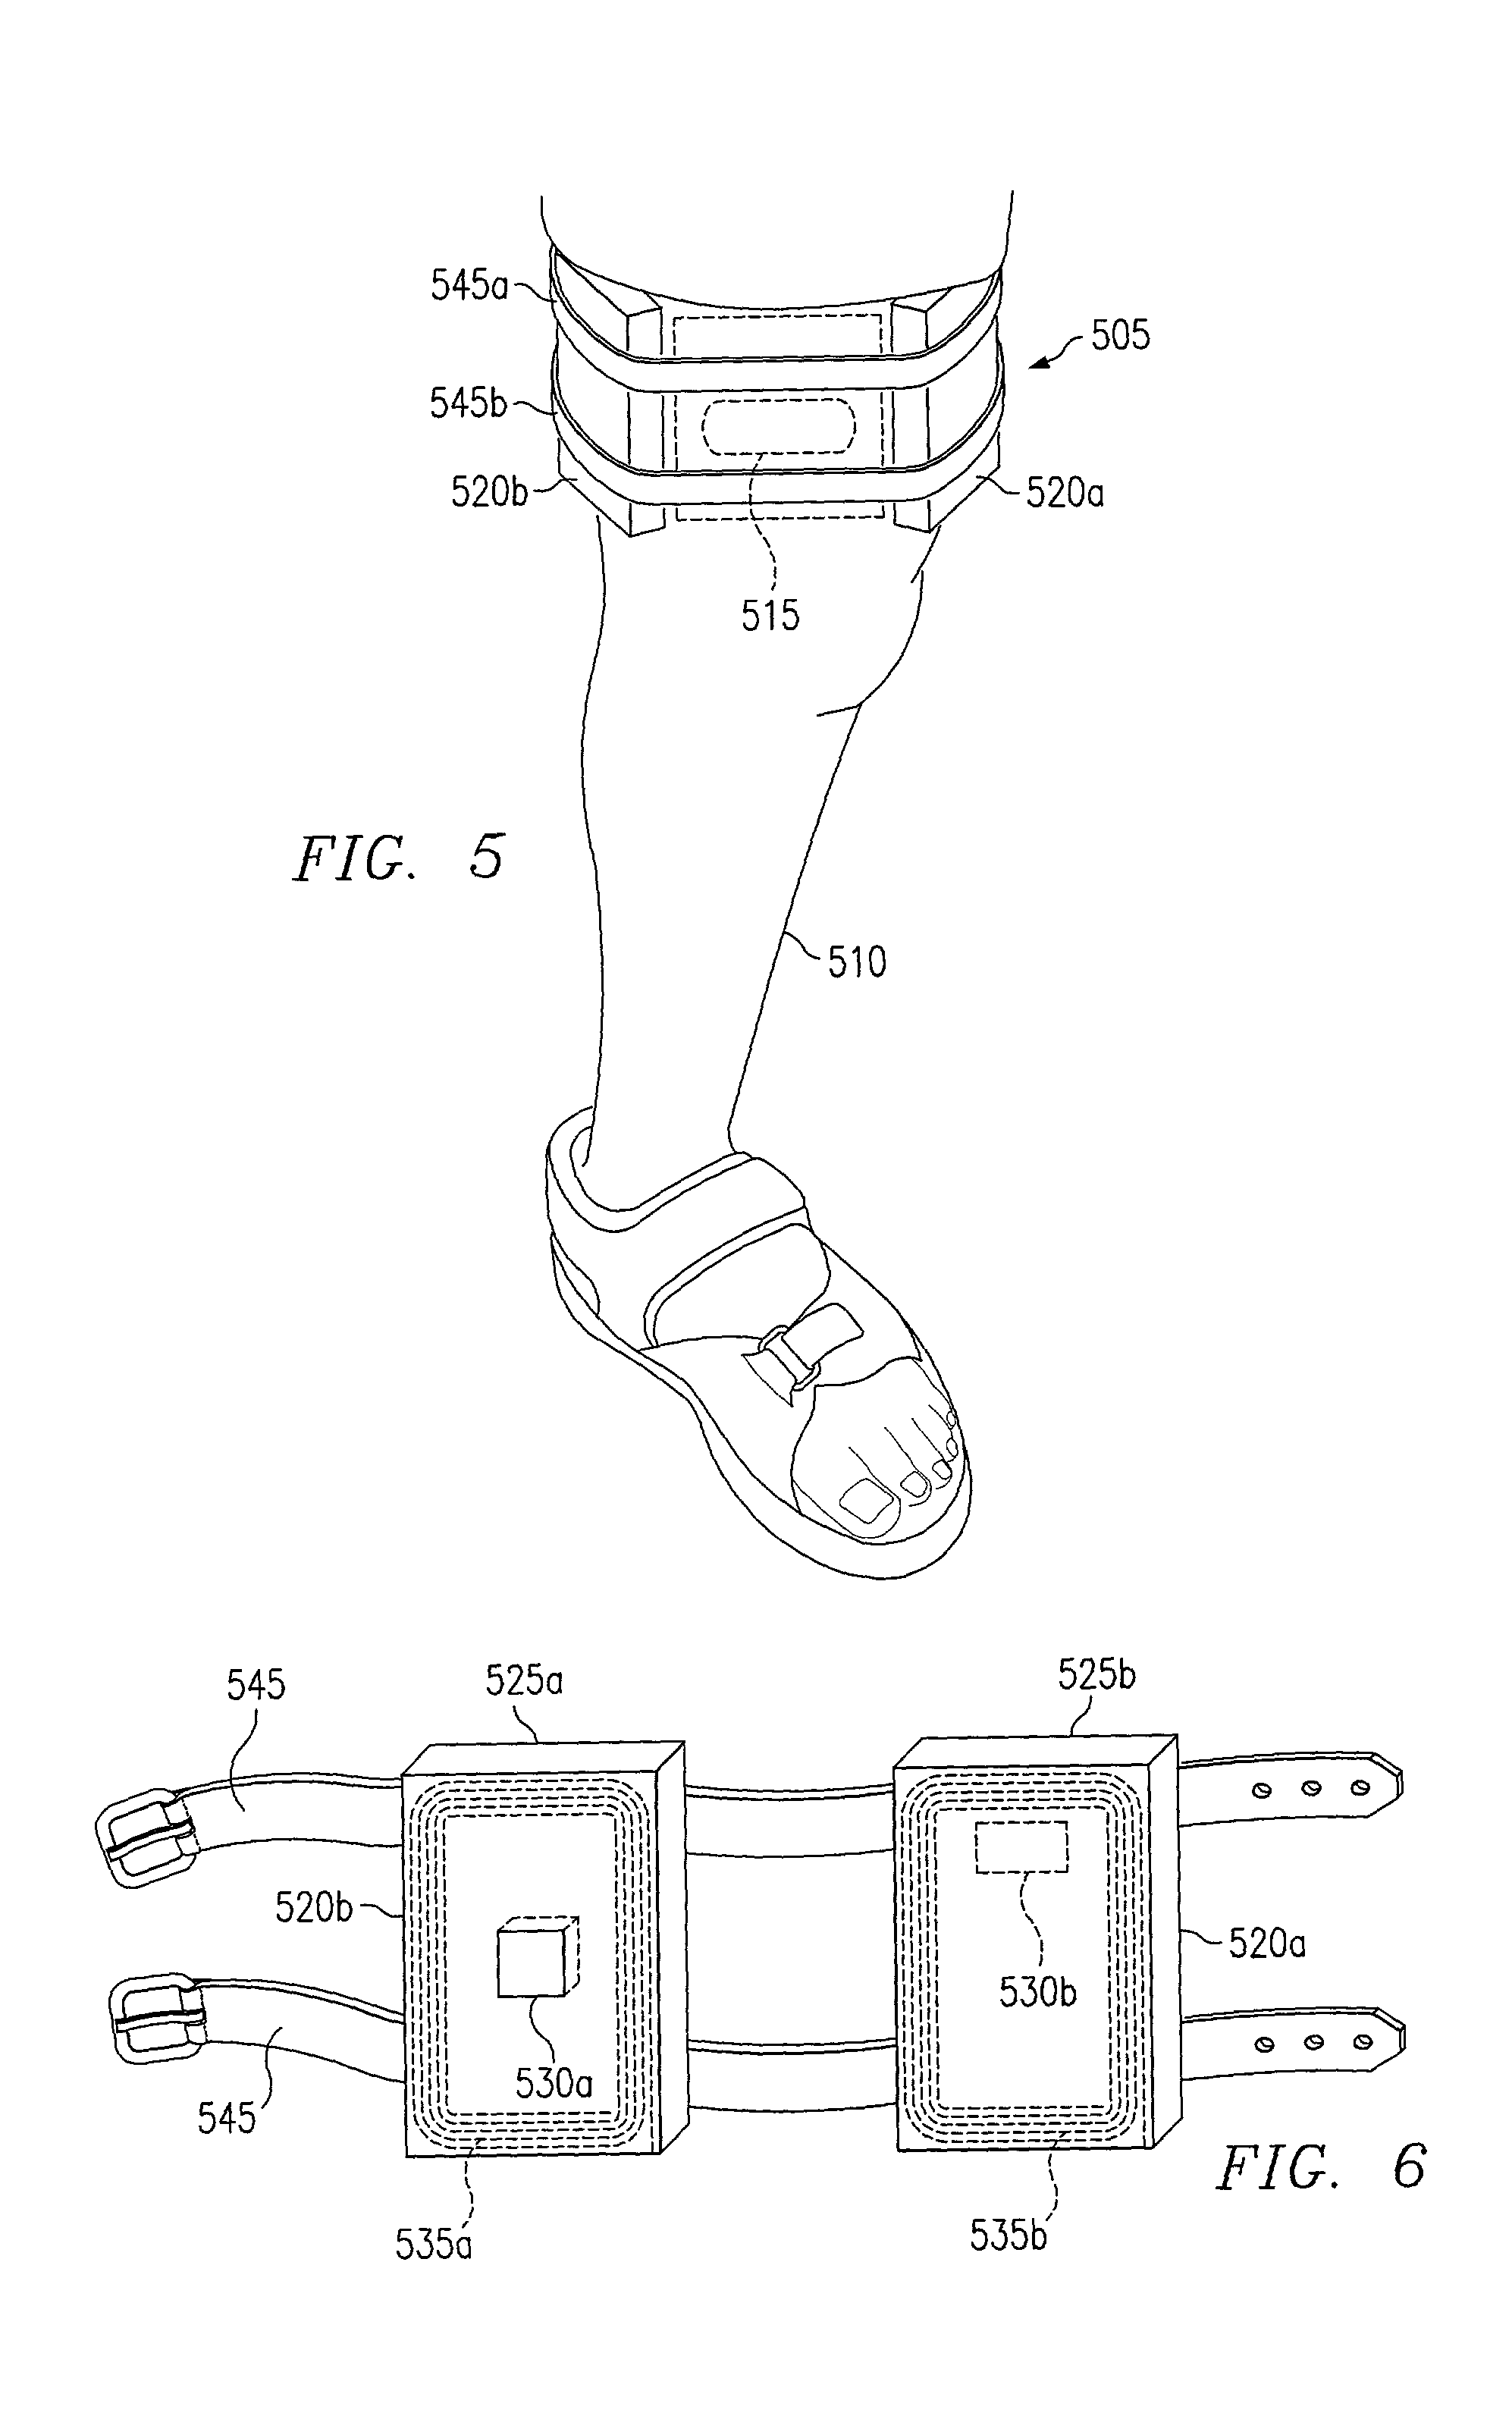 Methods of stimulating cell receptor activity using electromagnetic fields